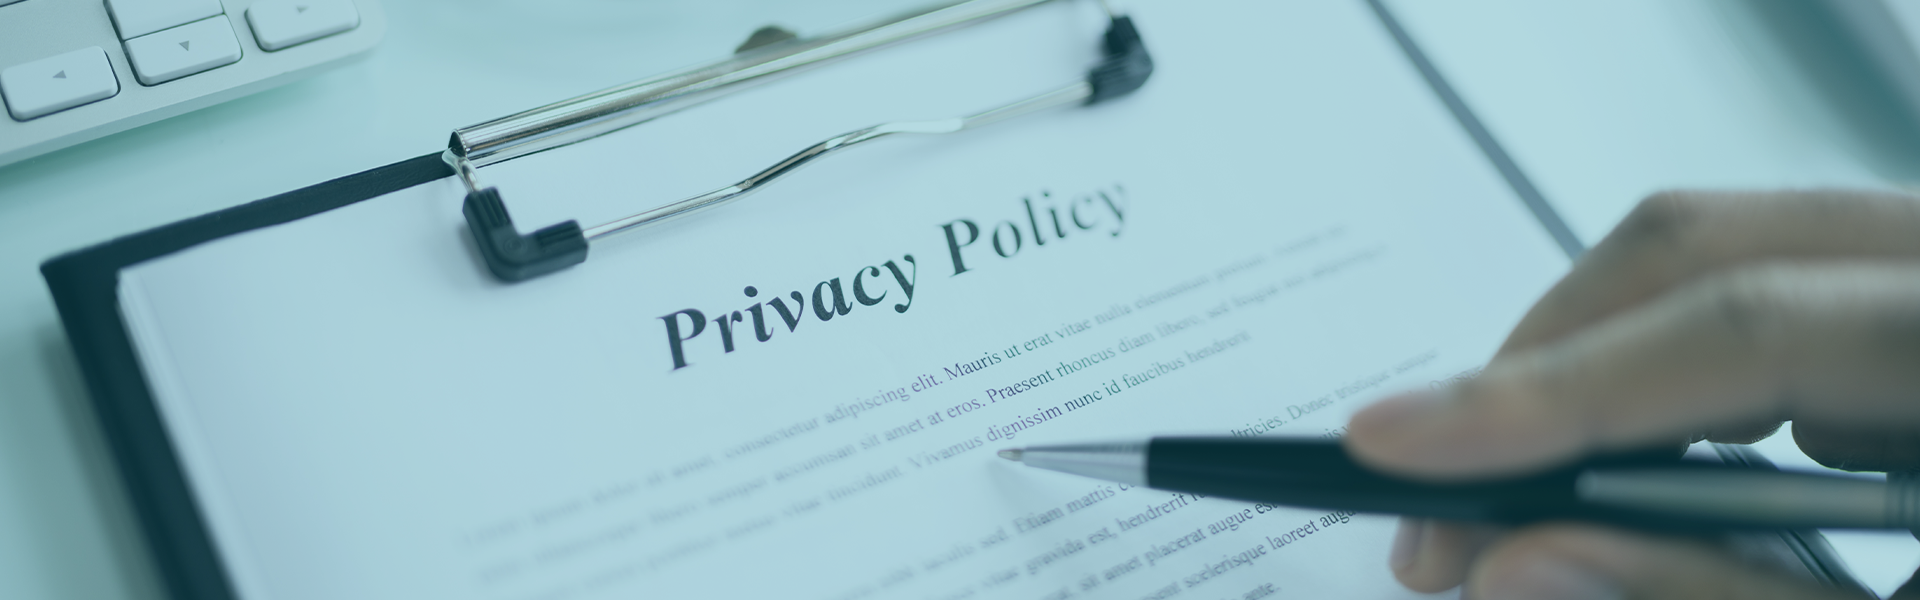 Online Privacy Policy Document